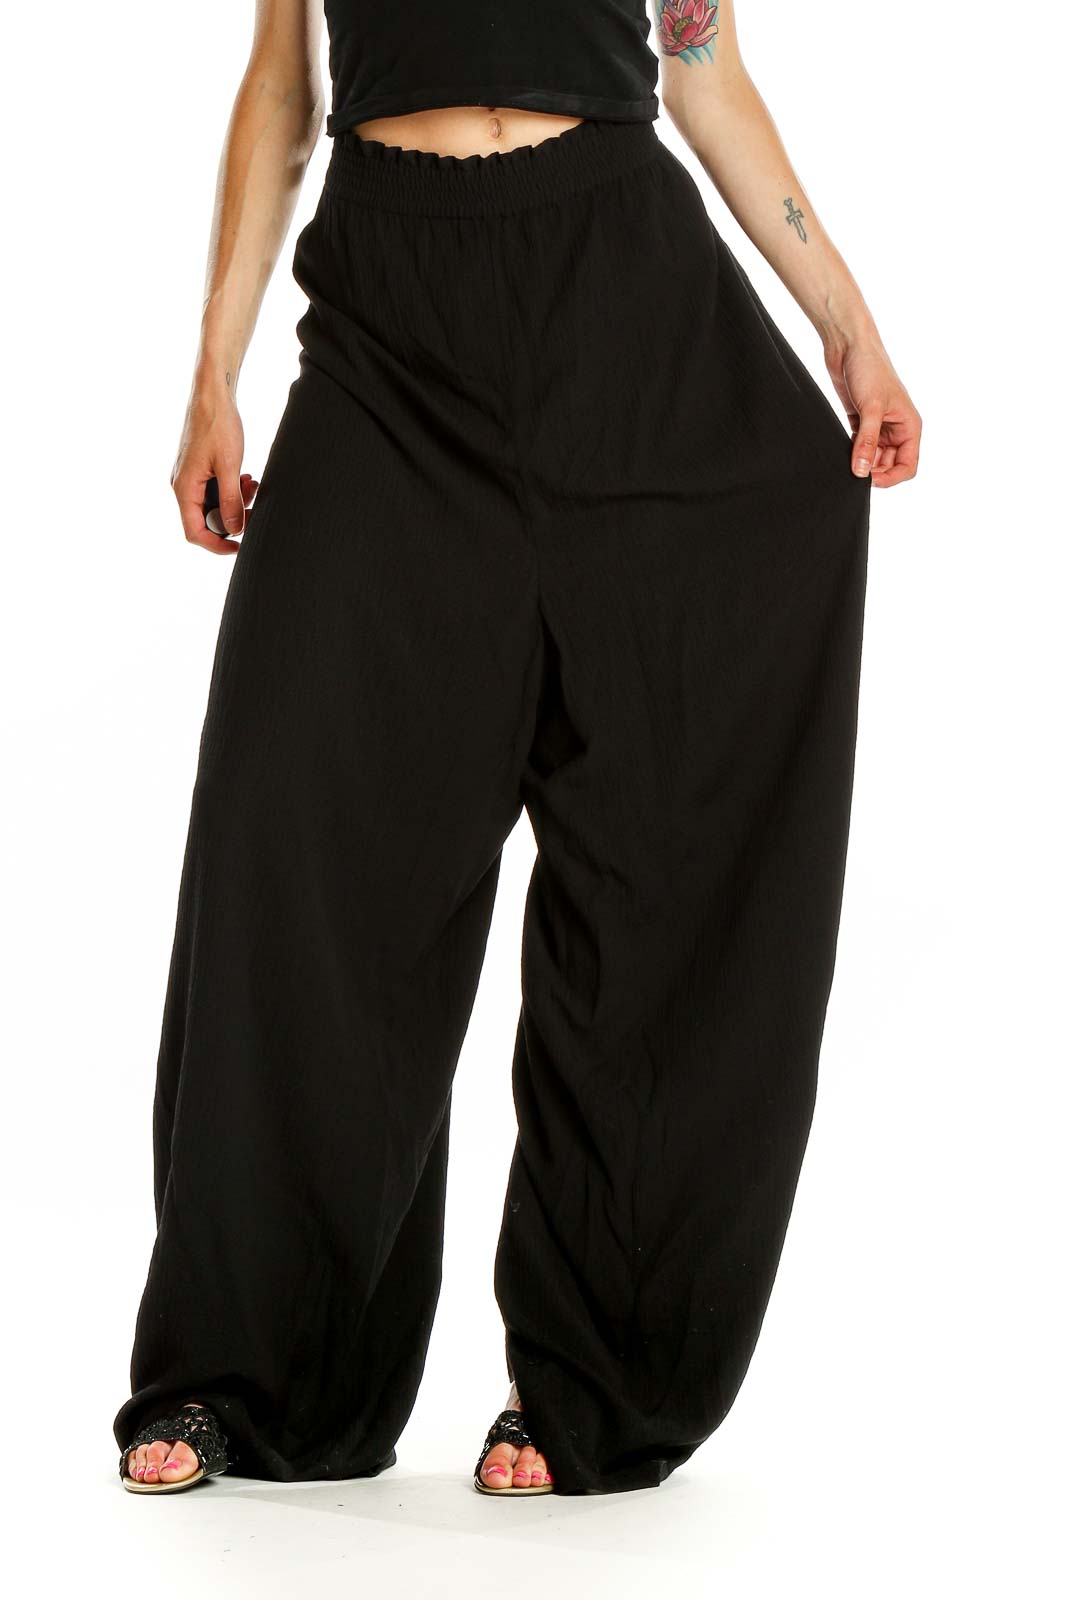 Black Textured All Day Wear Pants Front